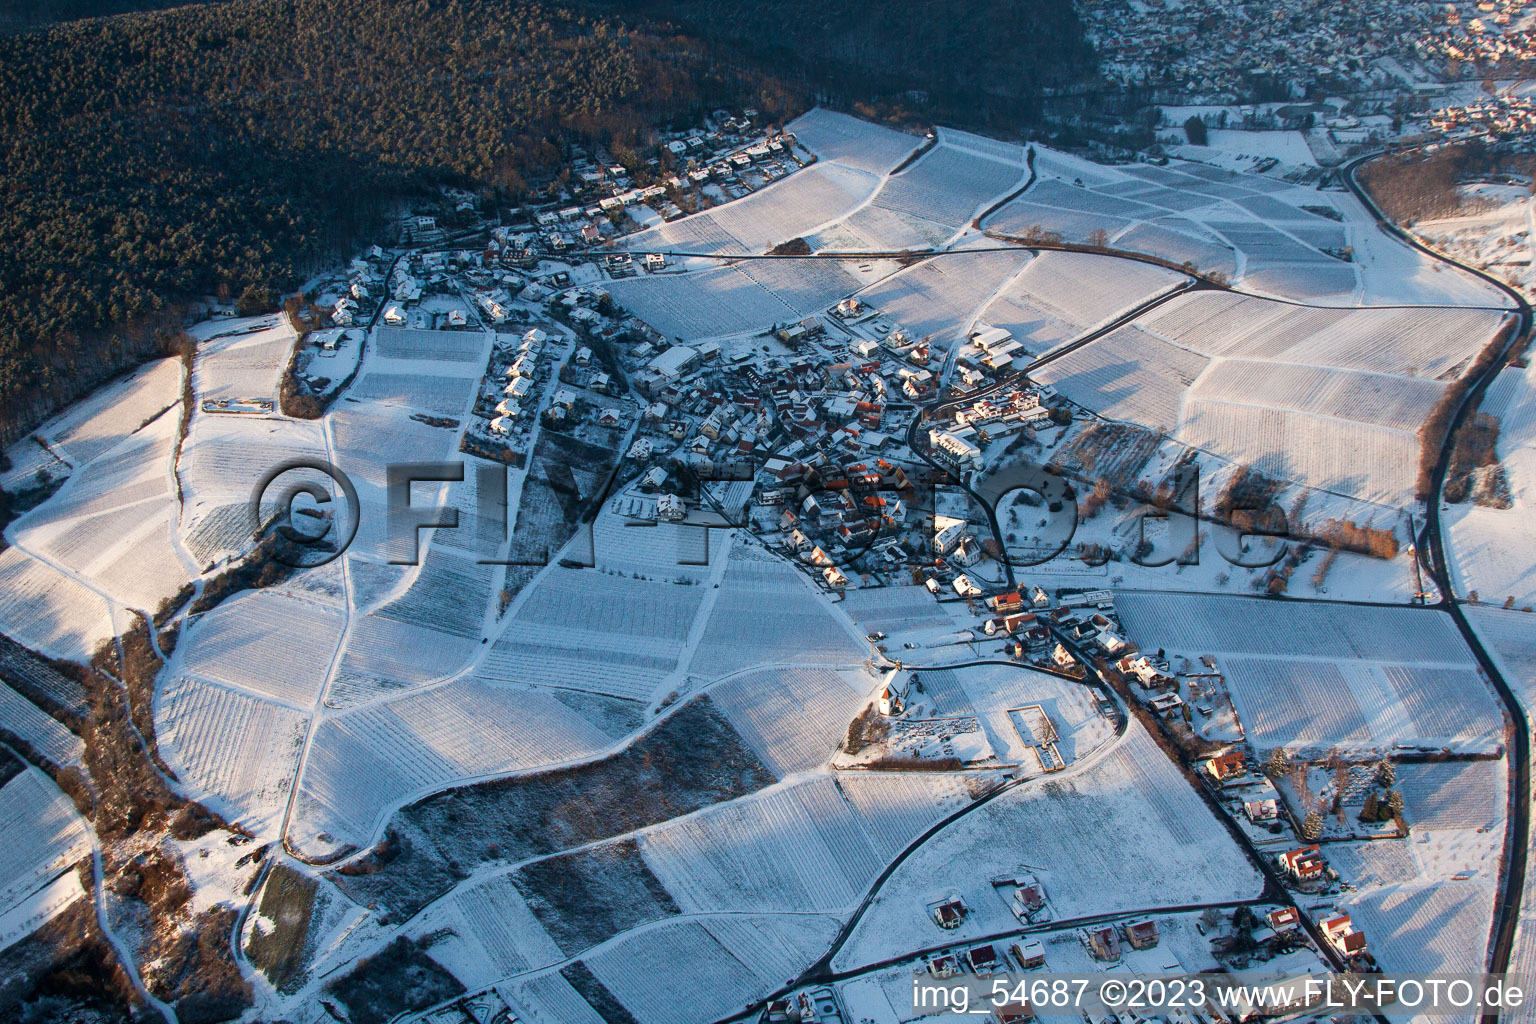 Aerial photograpy of In winter in the district Gleiszellen in Gleiszellen-Gleishorbach in the state Rhineland-Palatinate, Germany